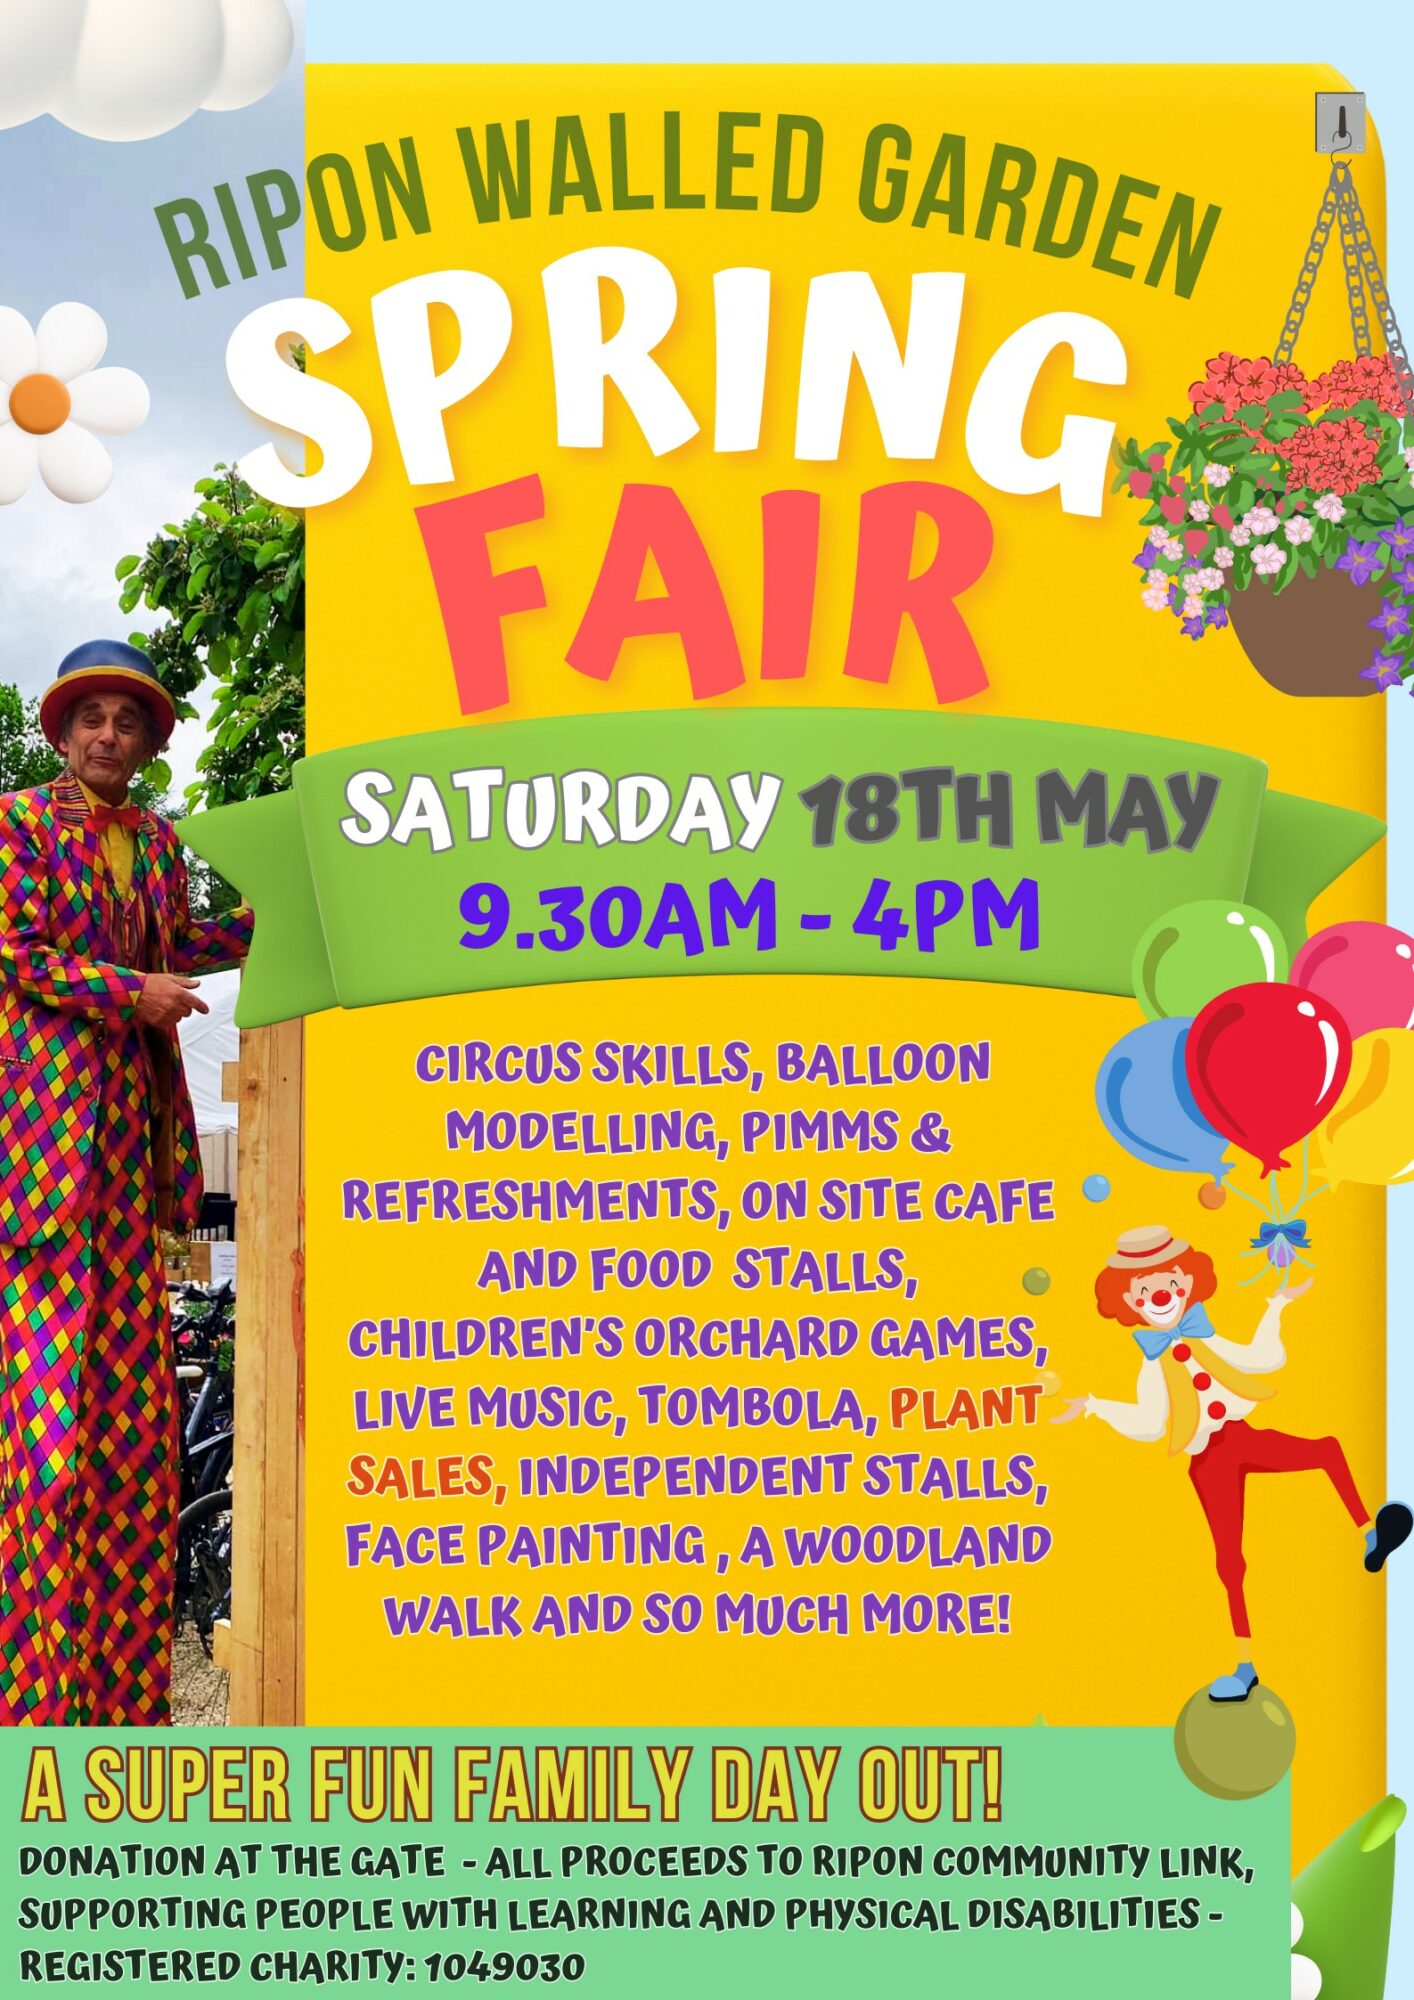 Image name spring fair poster final the 8 image from the post Events in Yorkshire.com.